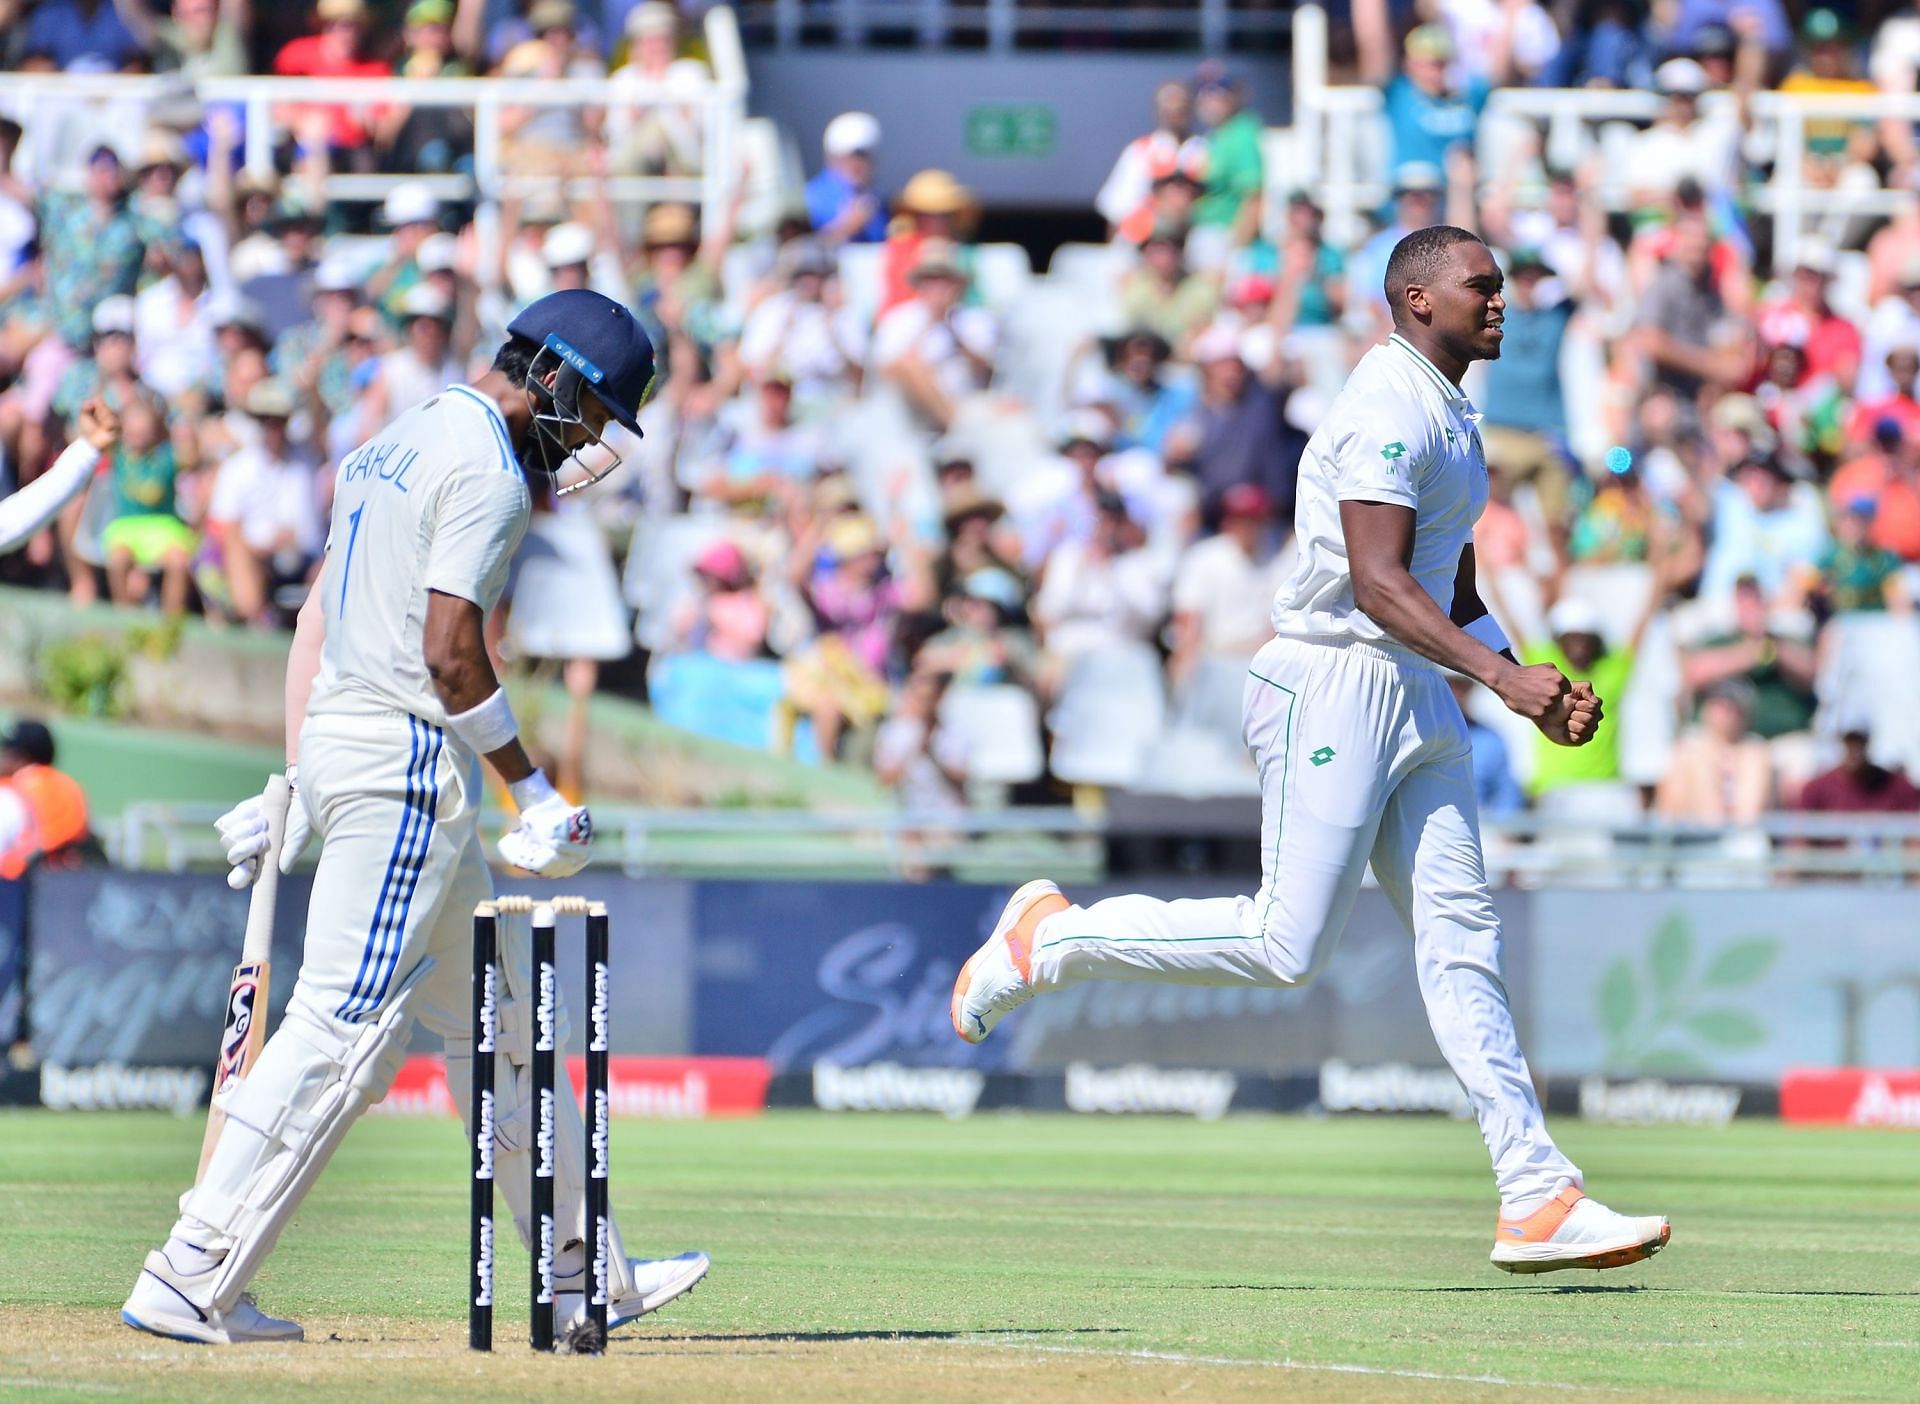 KL Rahul was caught behind off Lungi Ngidi&#039;s bowling. [P/C: Getty]